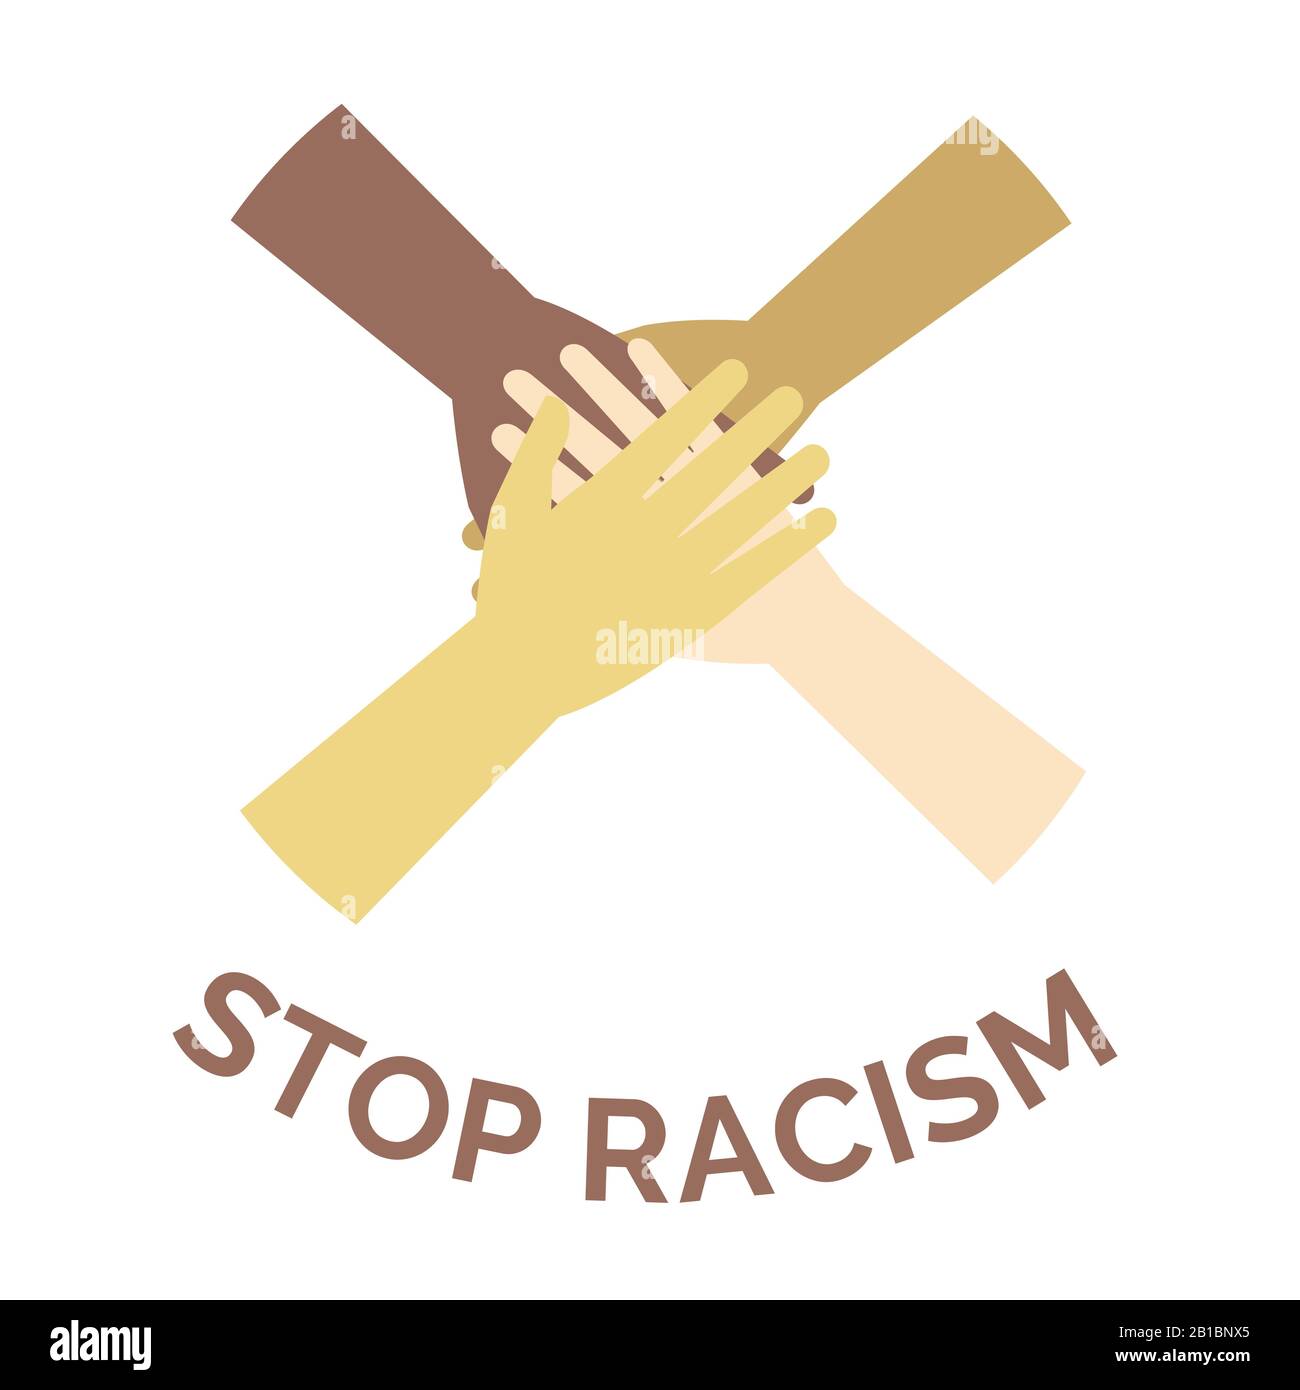 Stop racism vector banner concept. Hands of different skin color and diverse races people putting together cartoon illustration. Poster against racism and discrimination, all human beings are equal. Stock Vector